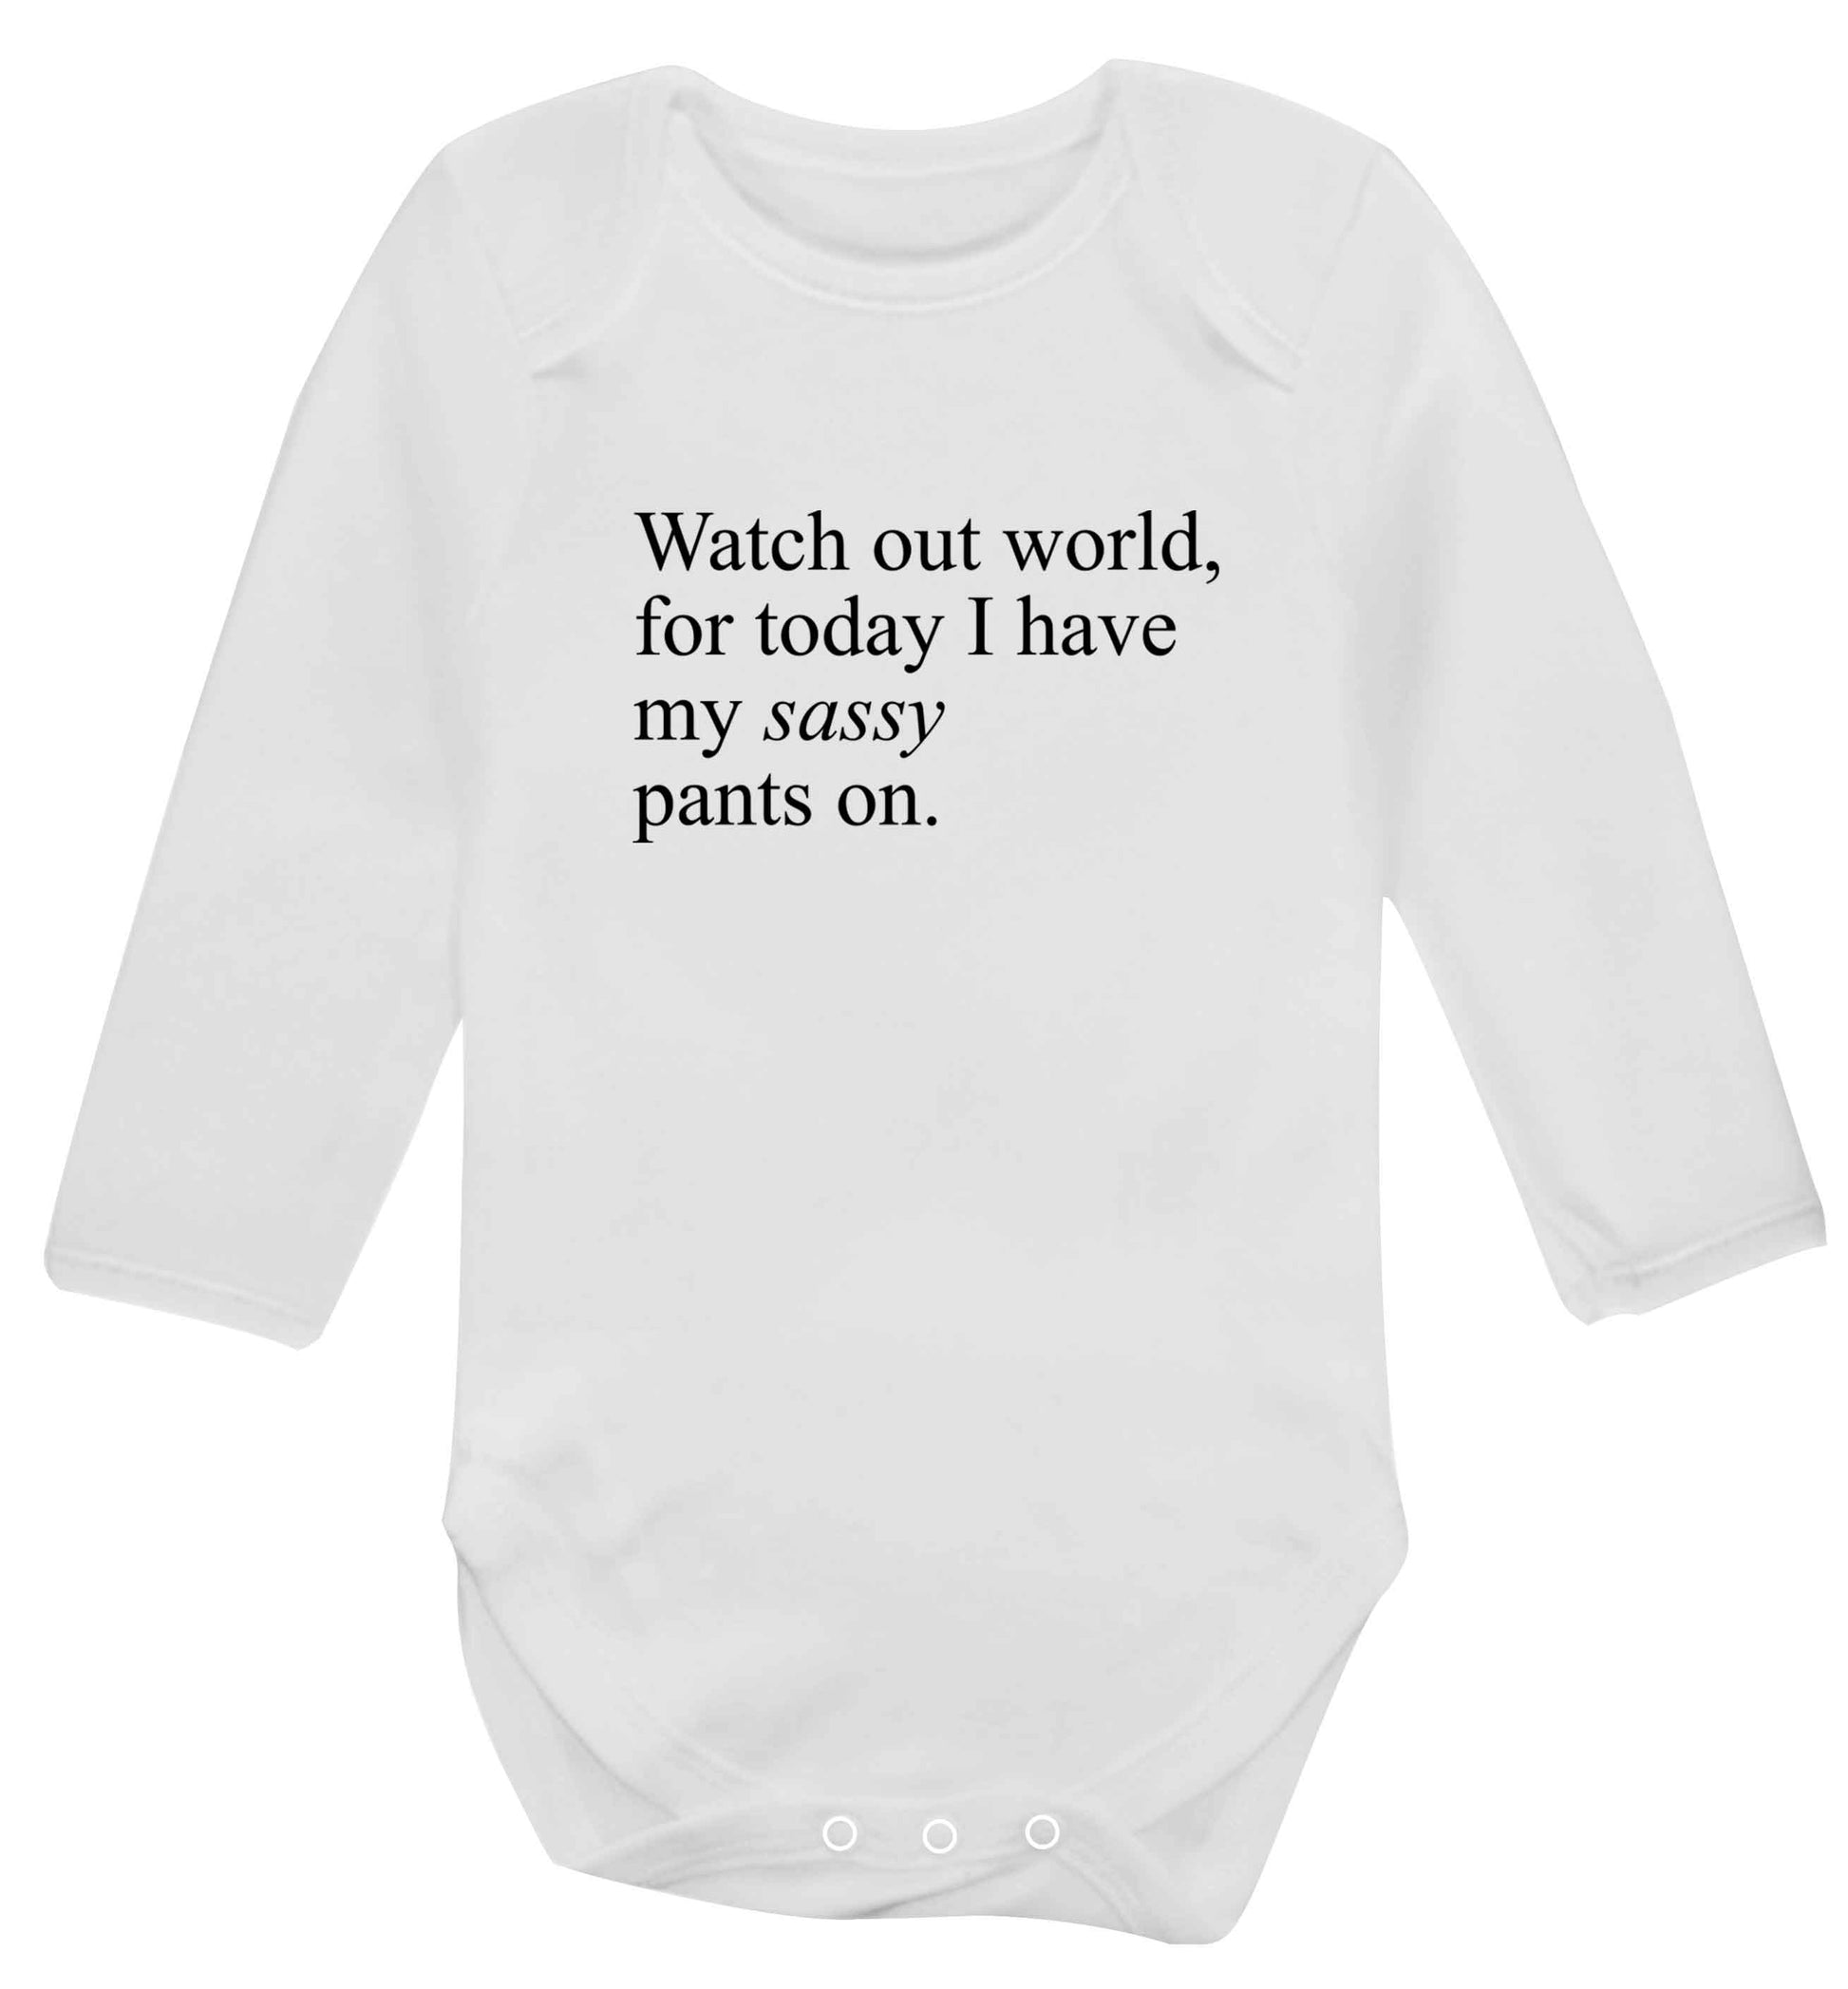 Watch out world for today I have my sassy pants on baby vest long sleeved white 6-12 months